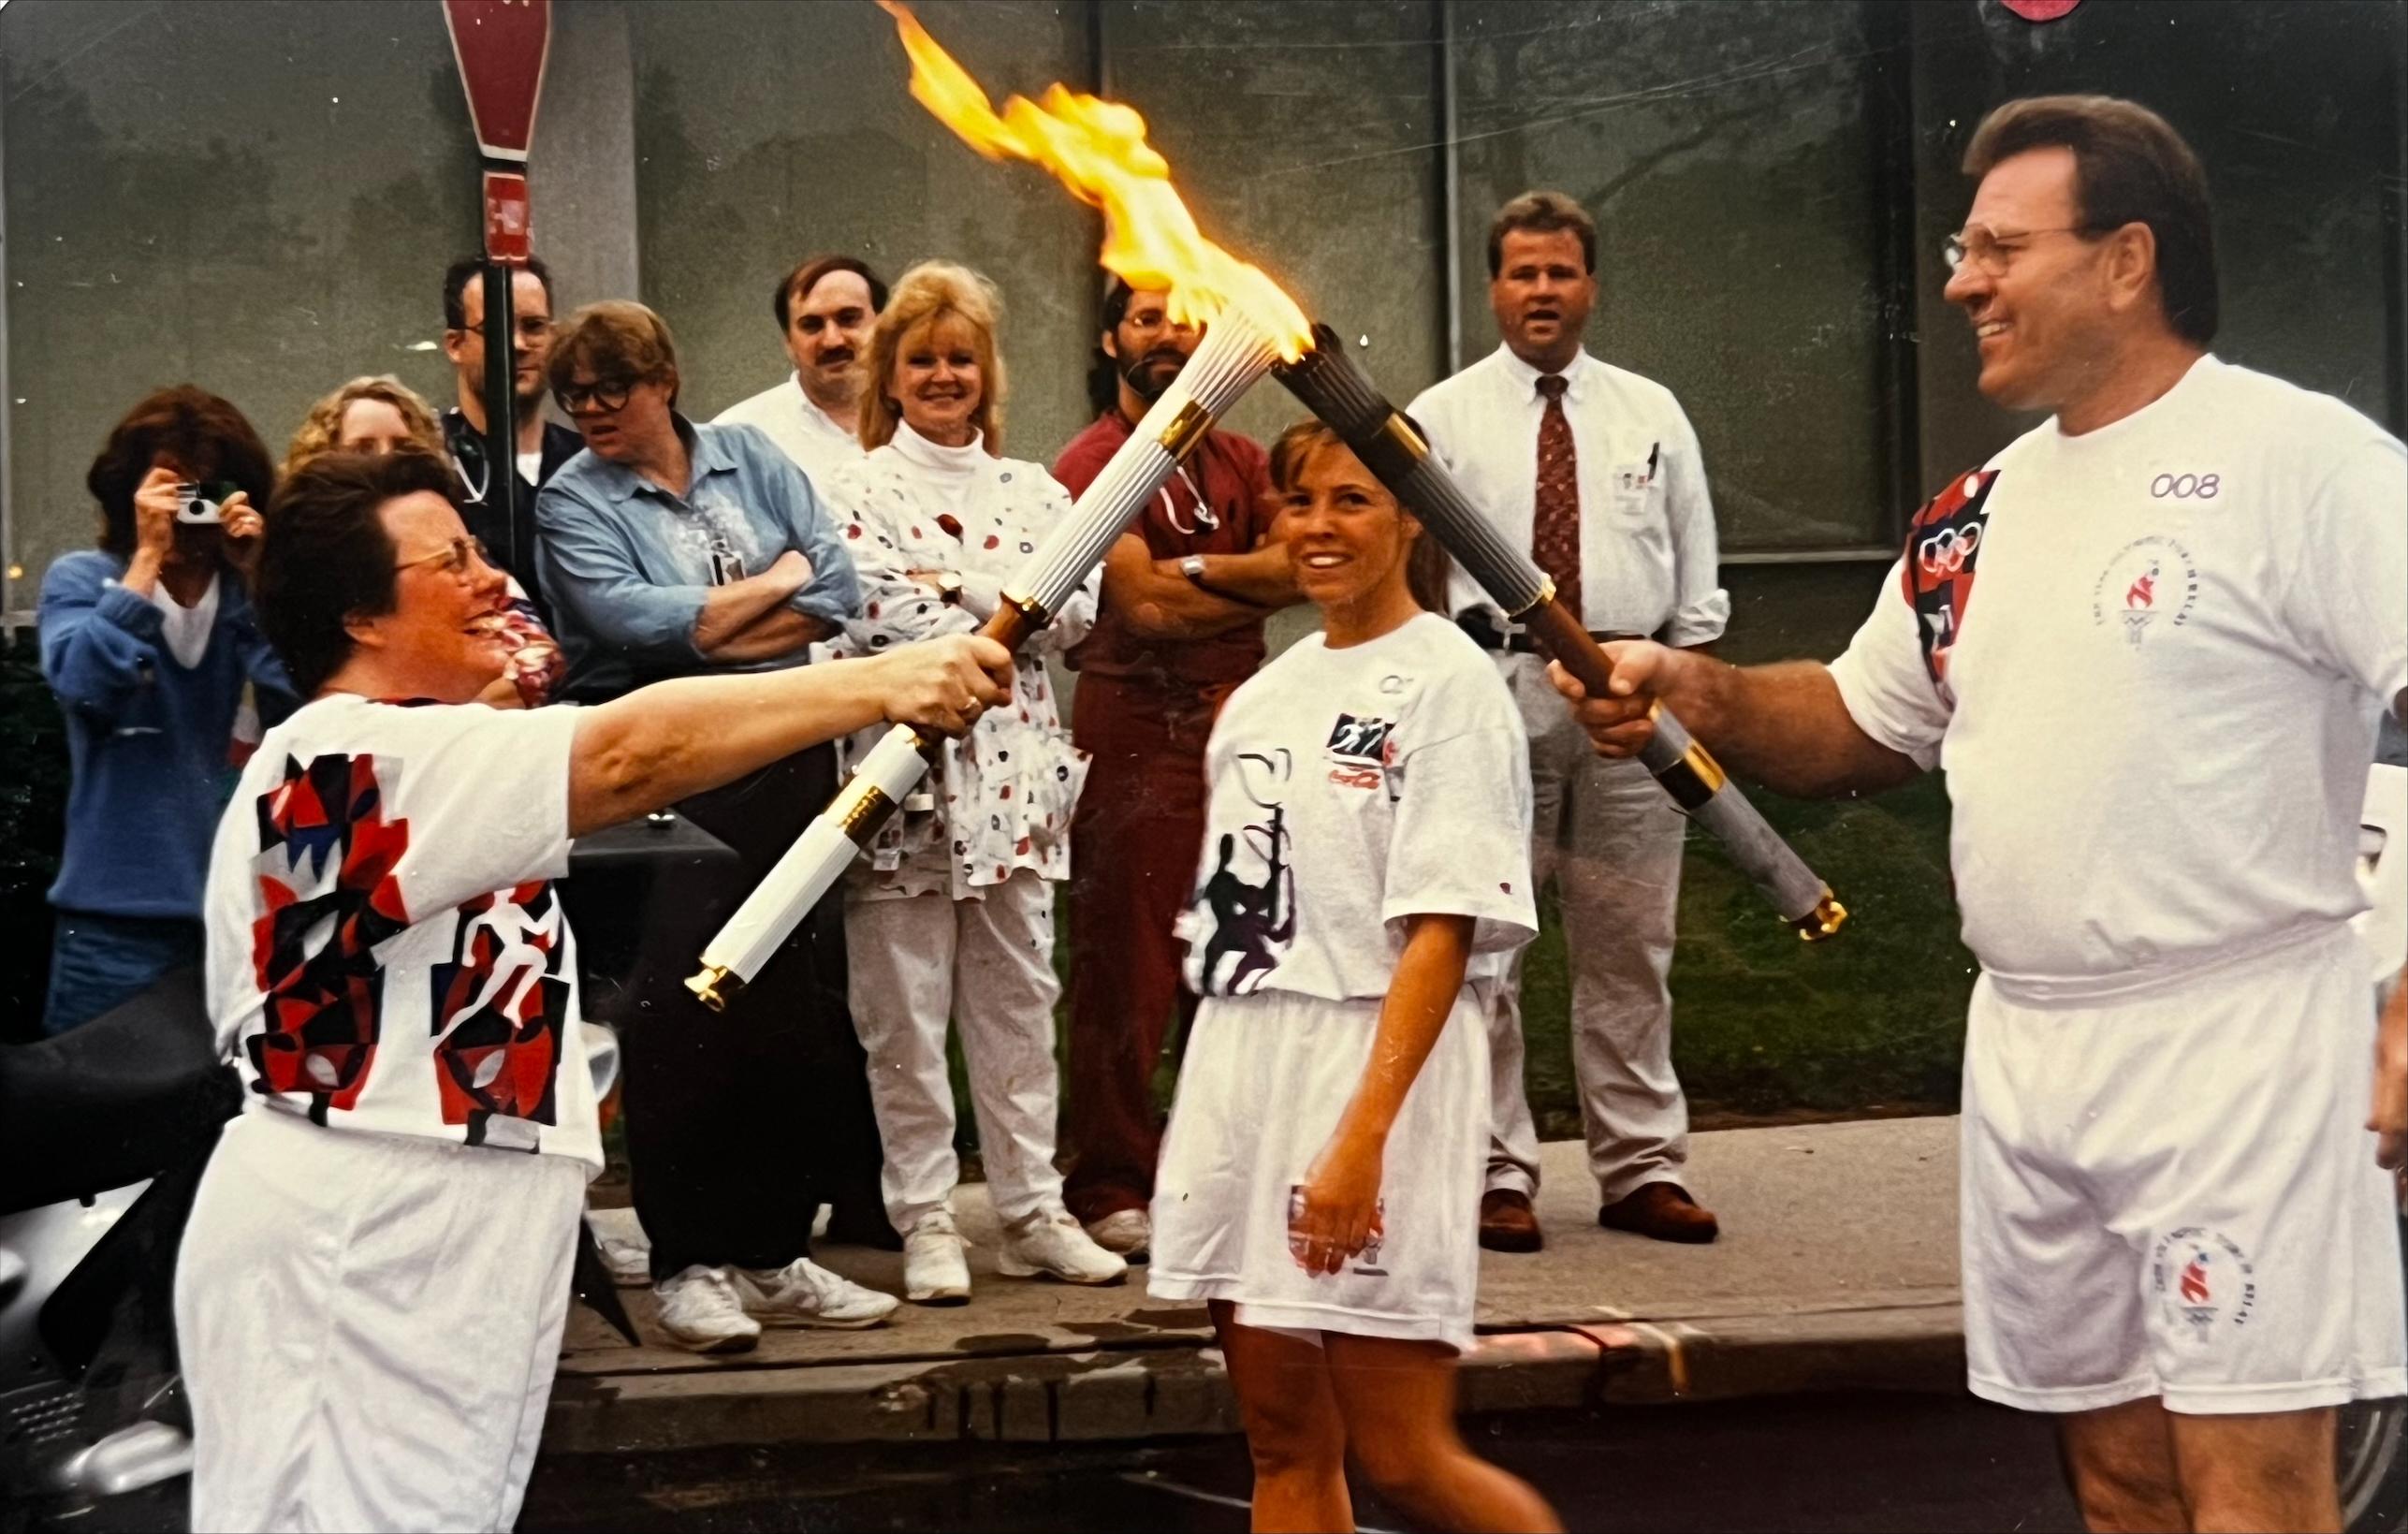 Woman lighting Olympic torch from male torch carrier